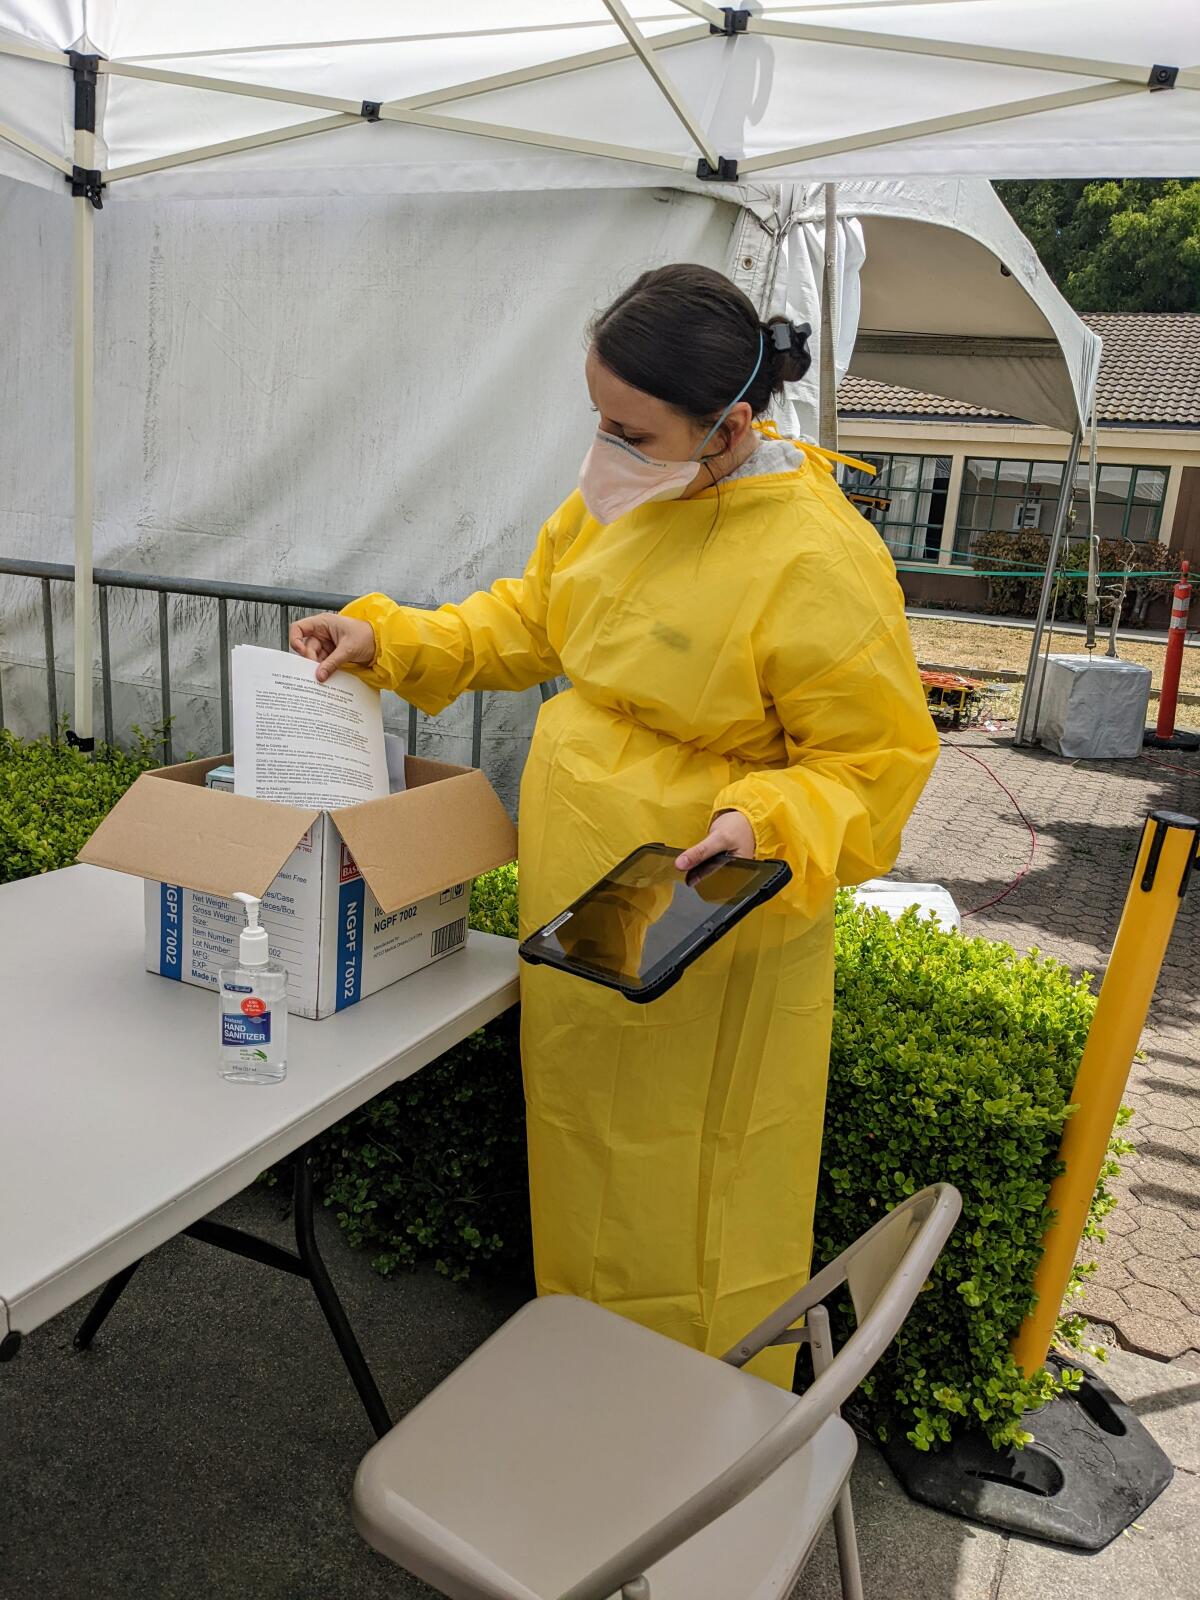 A nurse, standing, goes through a box of paperwork at an outdoor “test-to-treat” site.